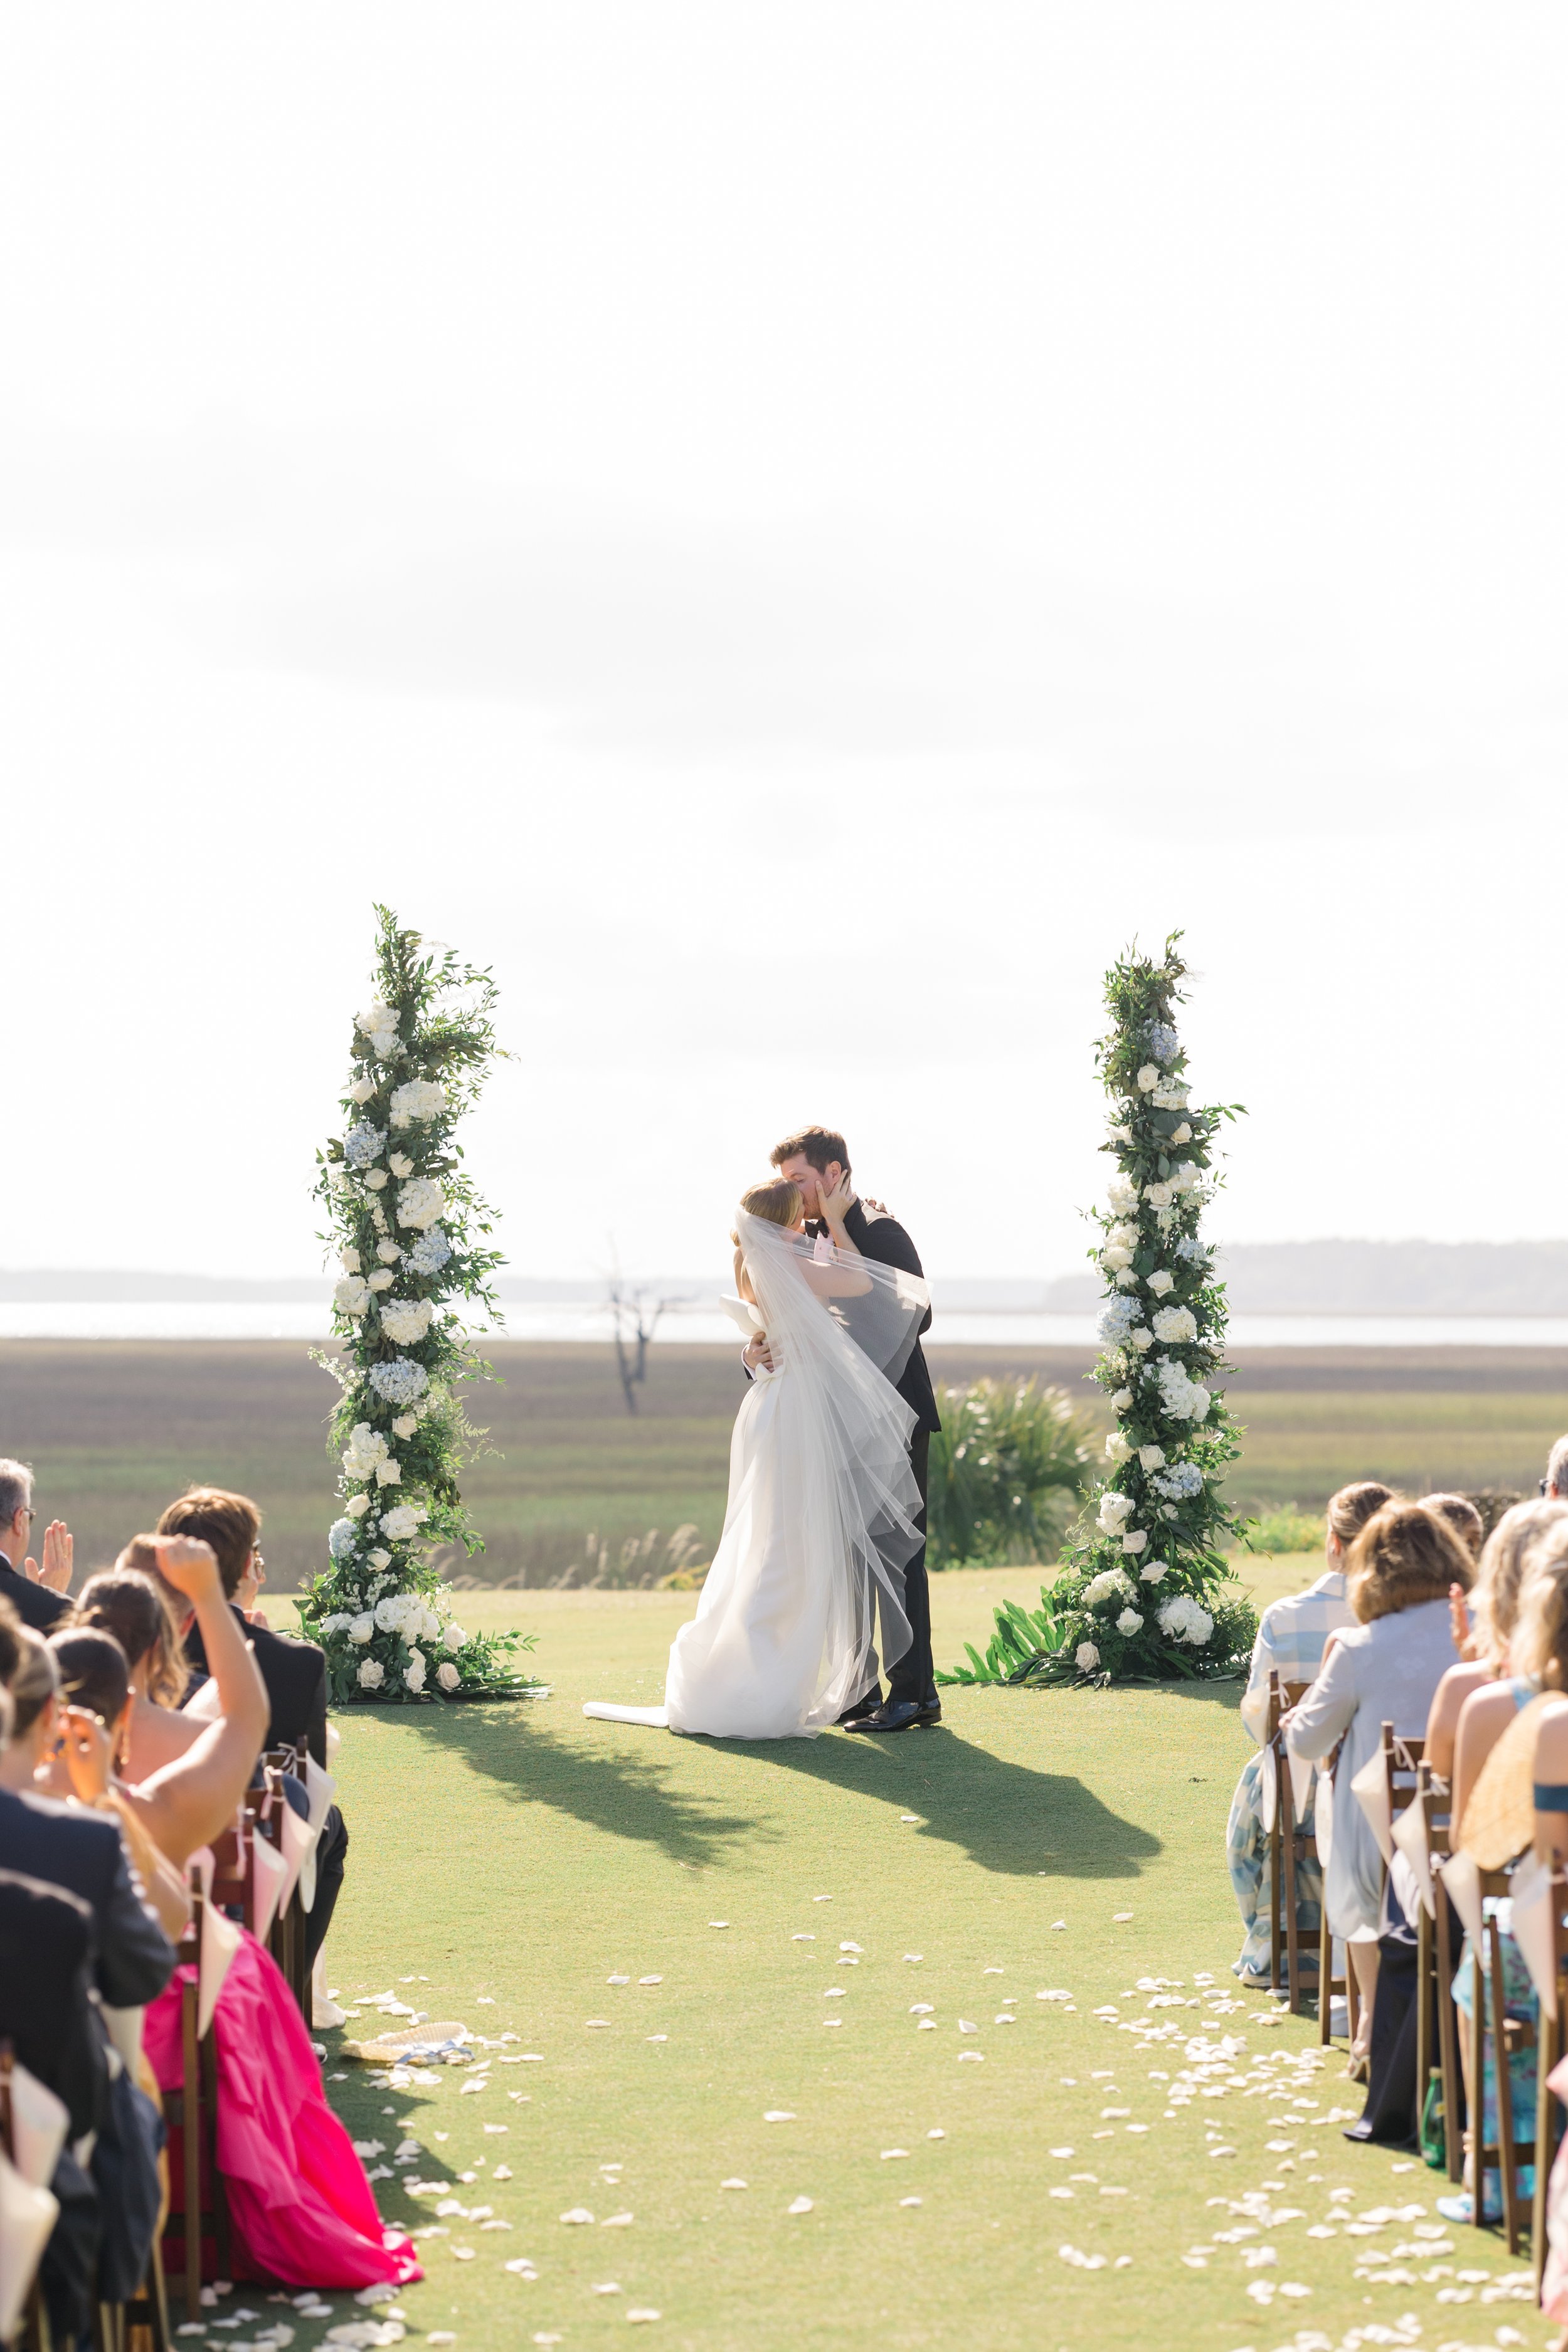 a-southern-chic-south-carolina-wedding-at-the-colleton-river-club-featuring-sophisticated-modern-florals-designed-by-savannah-florist-ivory-and-beau-25.jpg